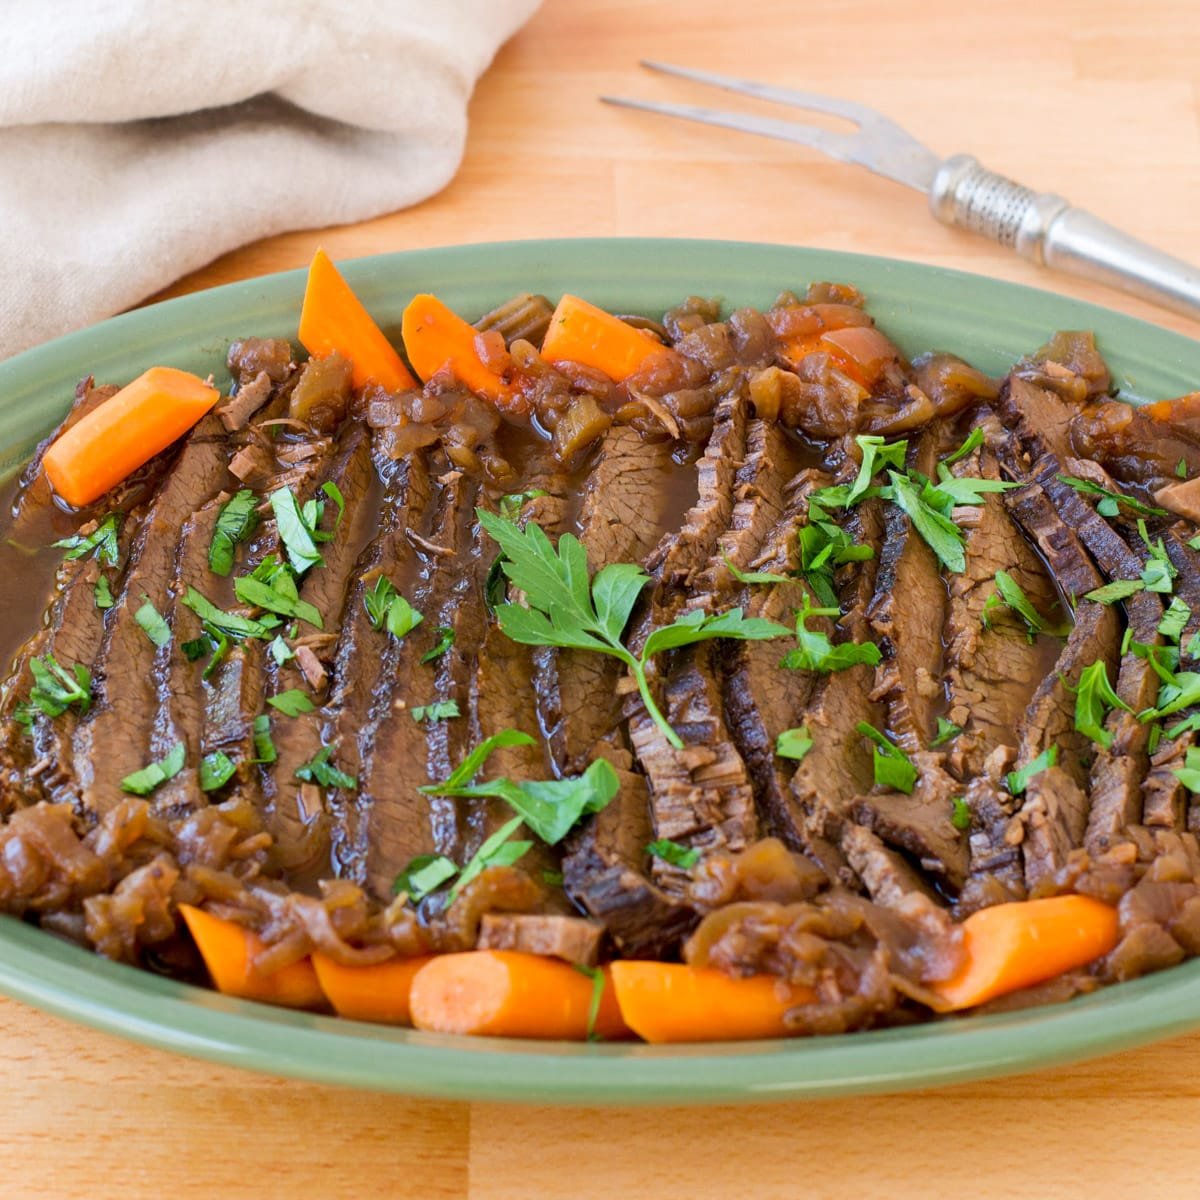 Beef brisket with carrots on a blue-green platter.